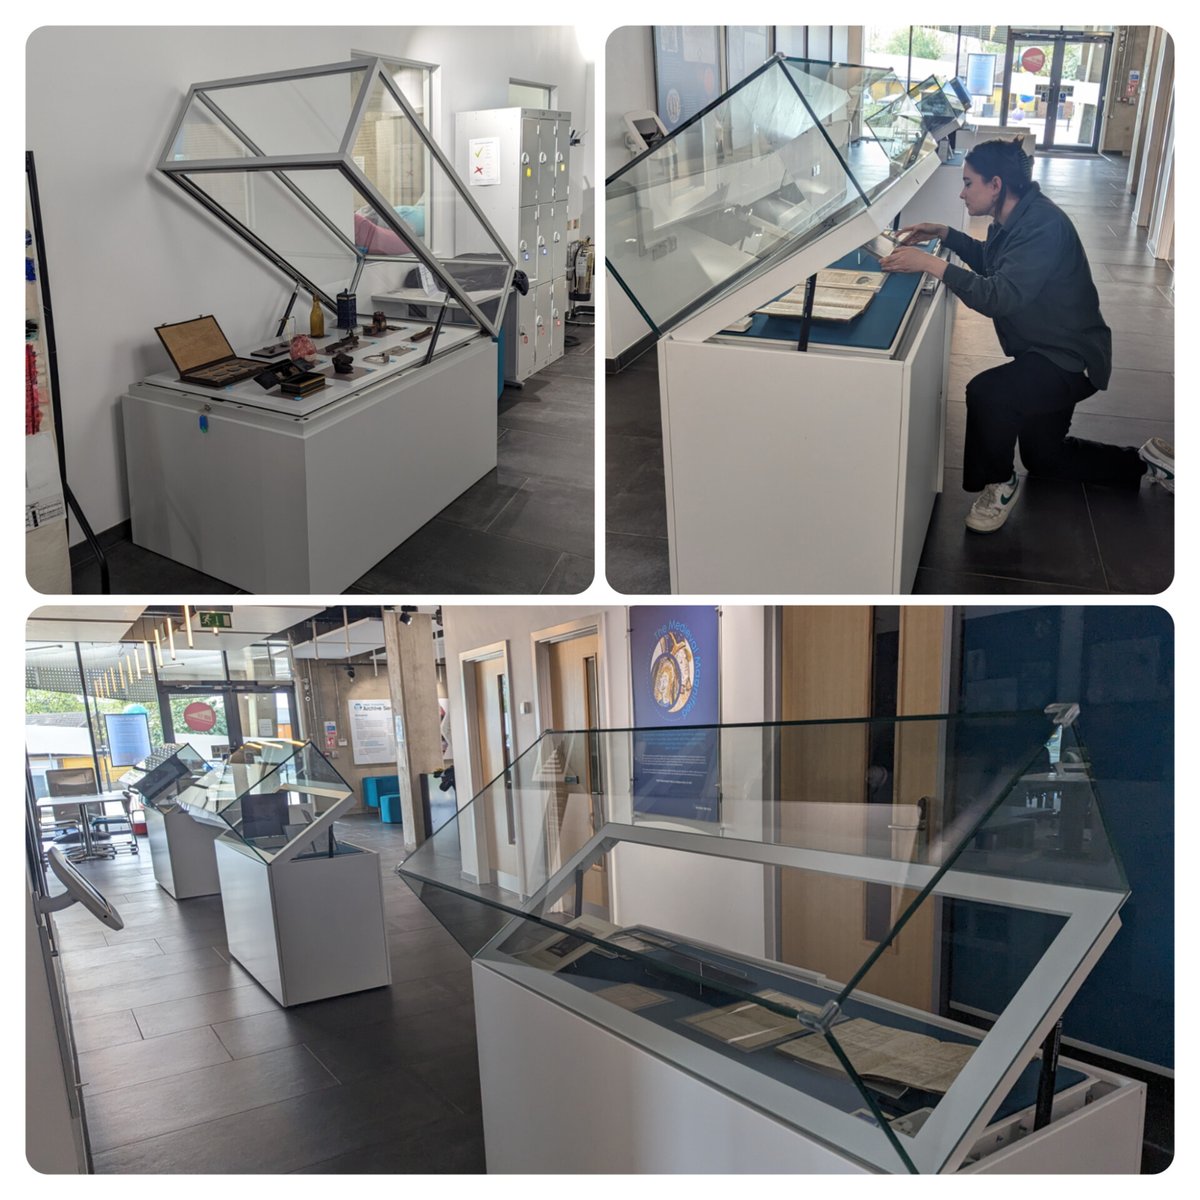 Today @WestYorkshireHistoryCentre we are busy installing The John Goodchild exhibition, which will showcase some of the treasures & curiosities from this important local collection. Opening Saturday 18th May 10:00-16:00. #DiscoverJG #OurYearWakefield